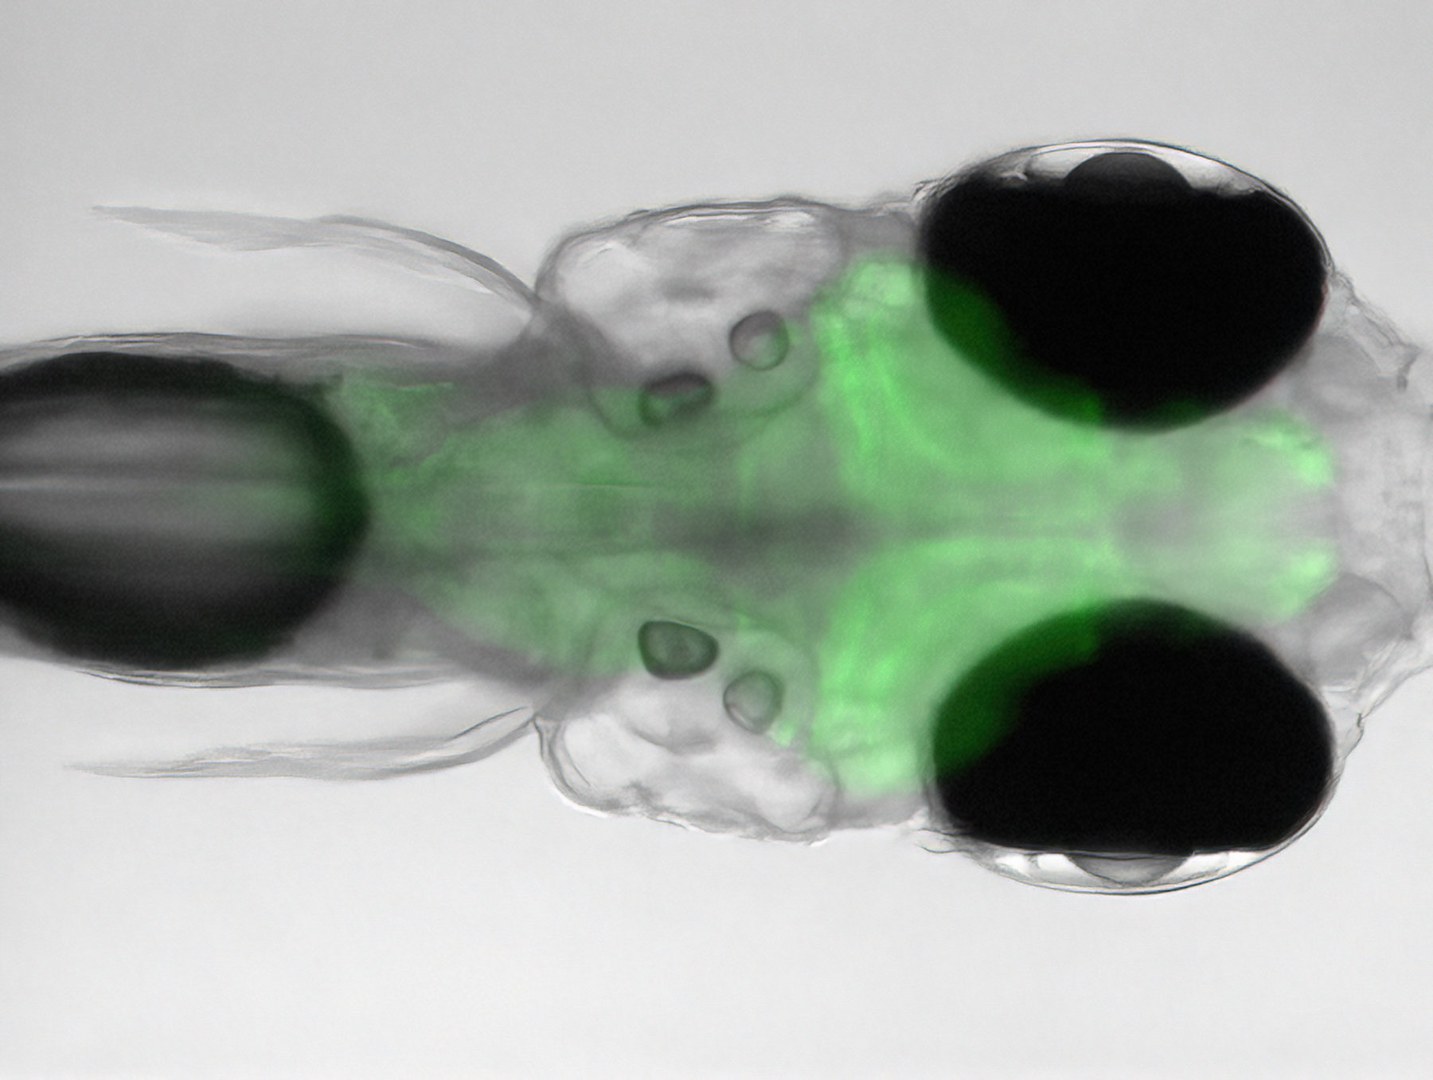 Head of a zebrafish larva - The transparent nature of these animals allows their brain to be identified under the microscope. It is colored green in the image because it produces a dye that lights up green during neuron activity.